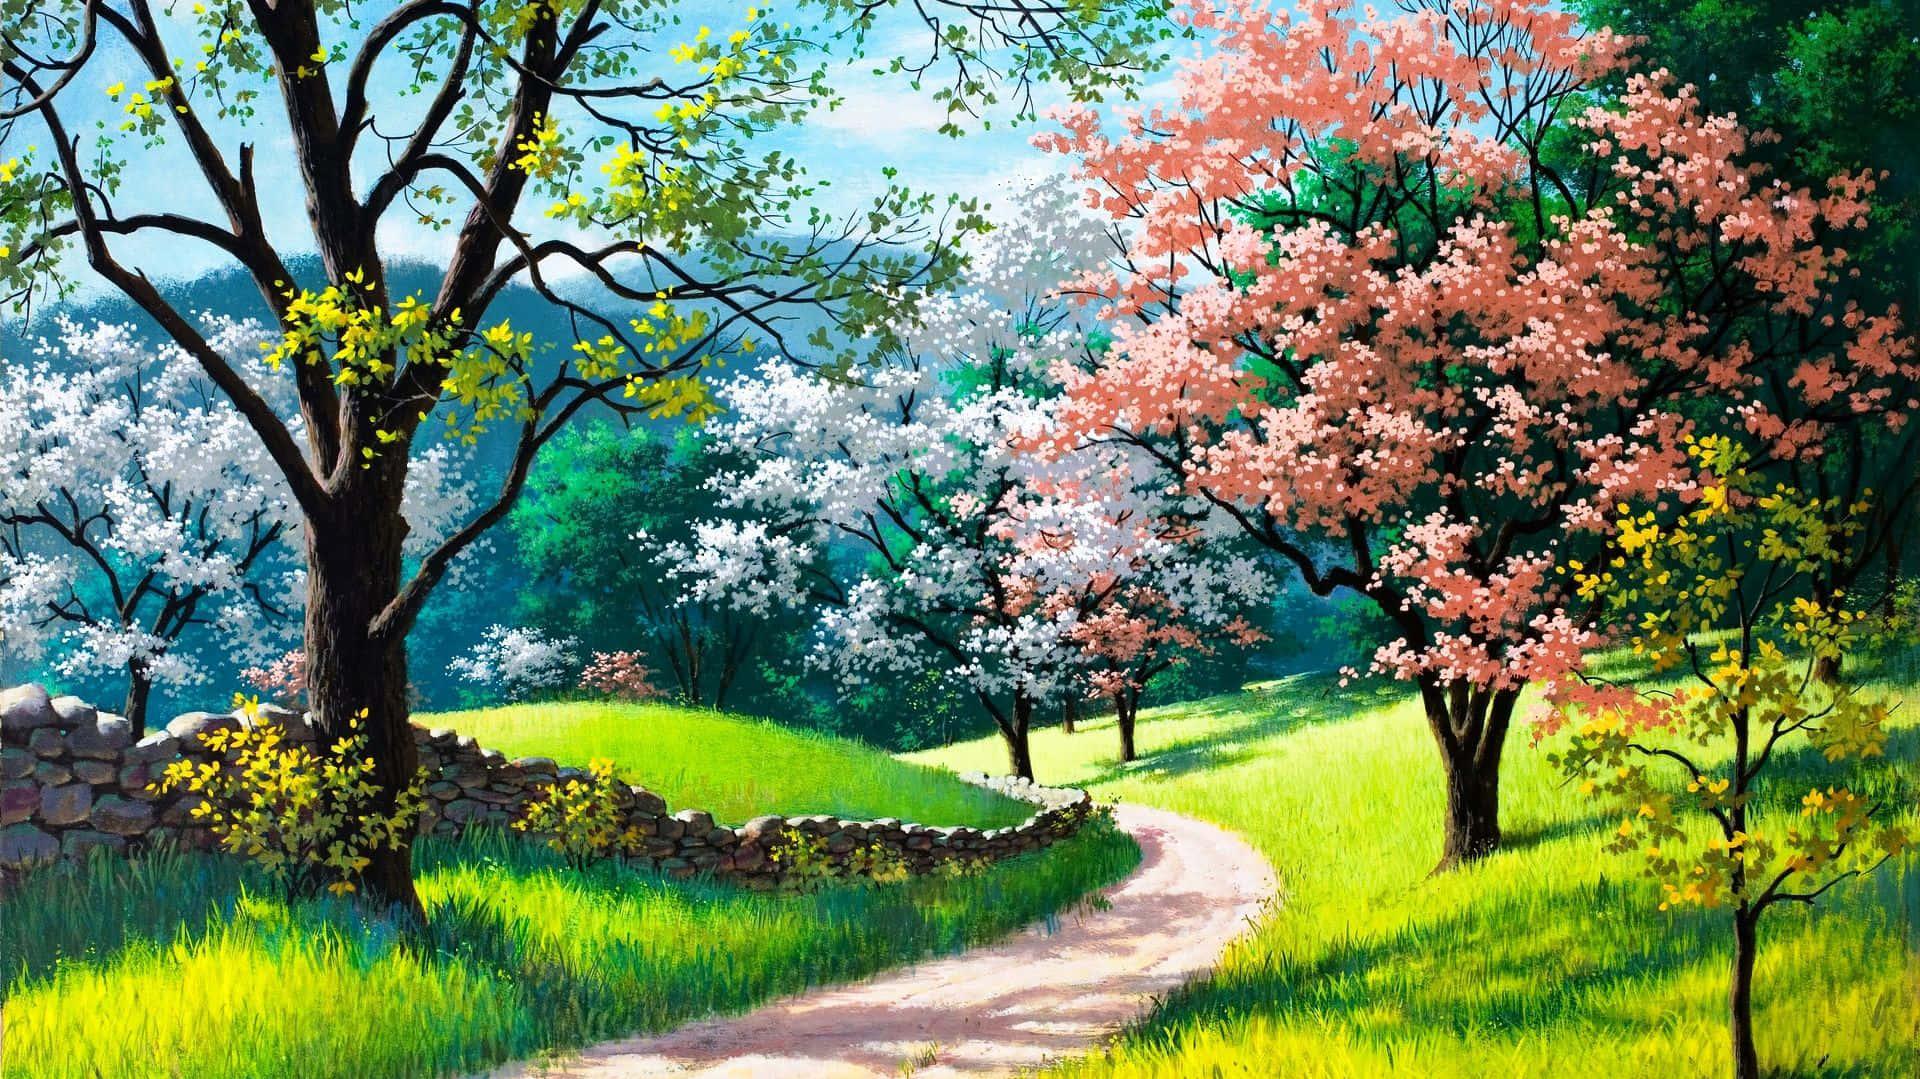 Enjoying A Spring Day In Nature Wallpaper